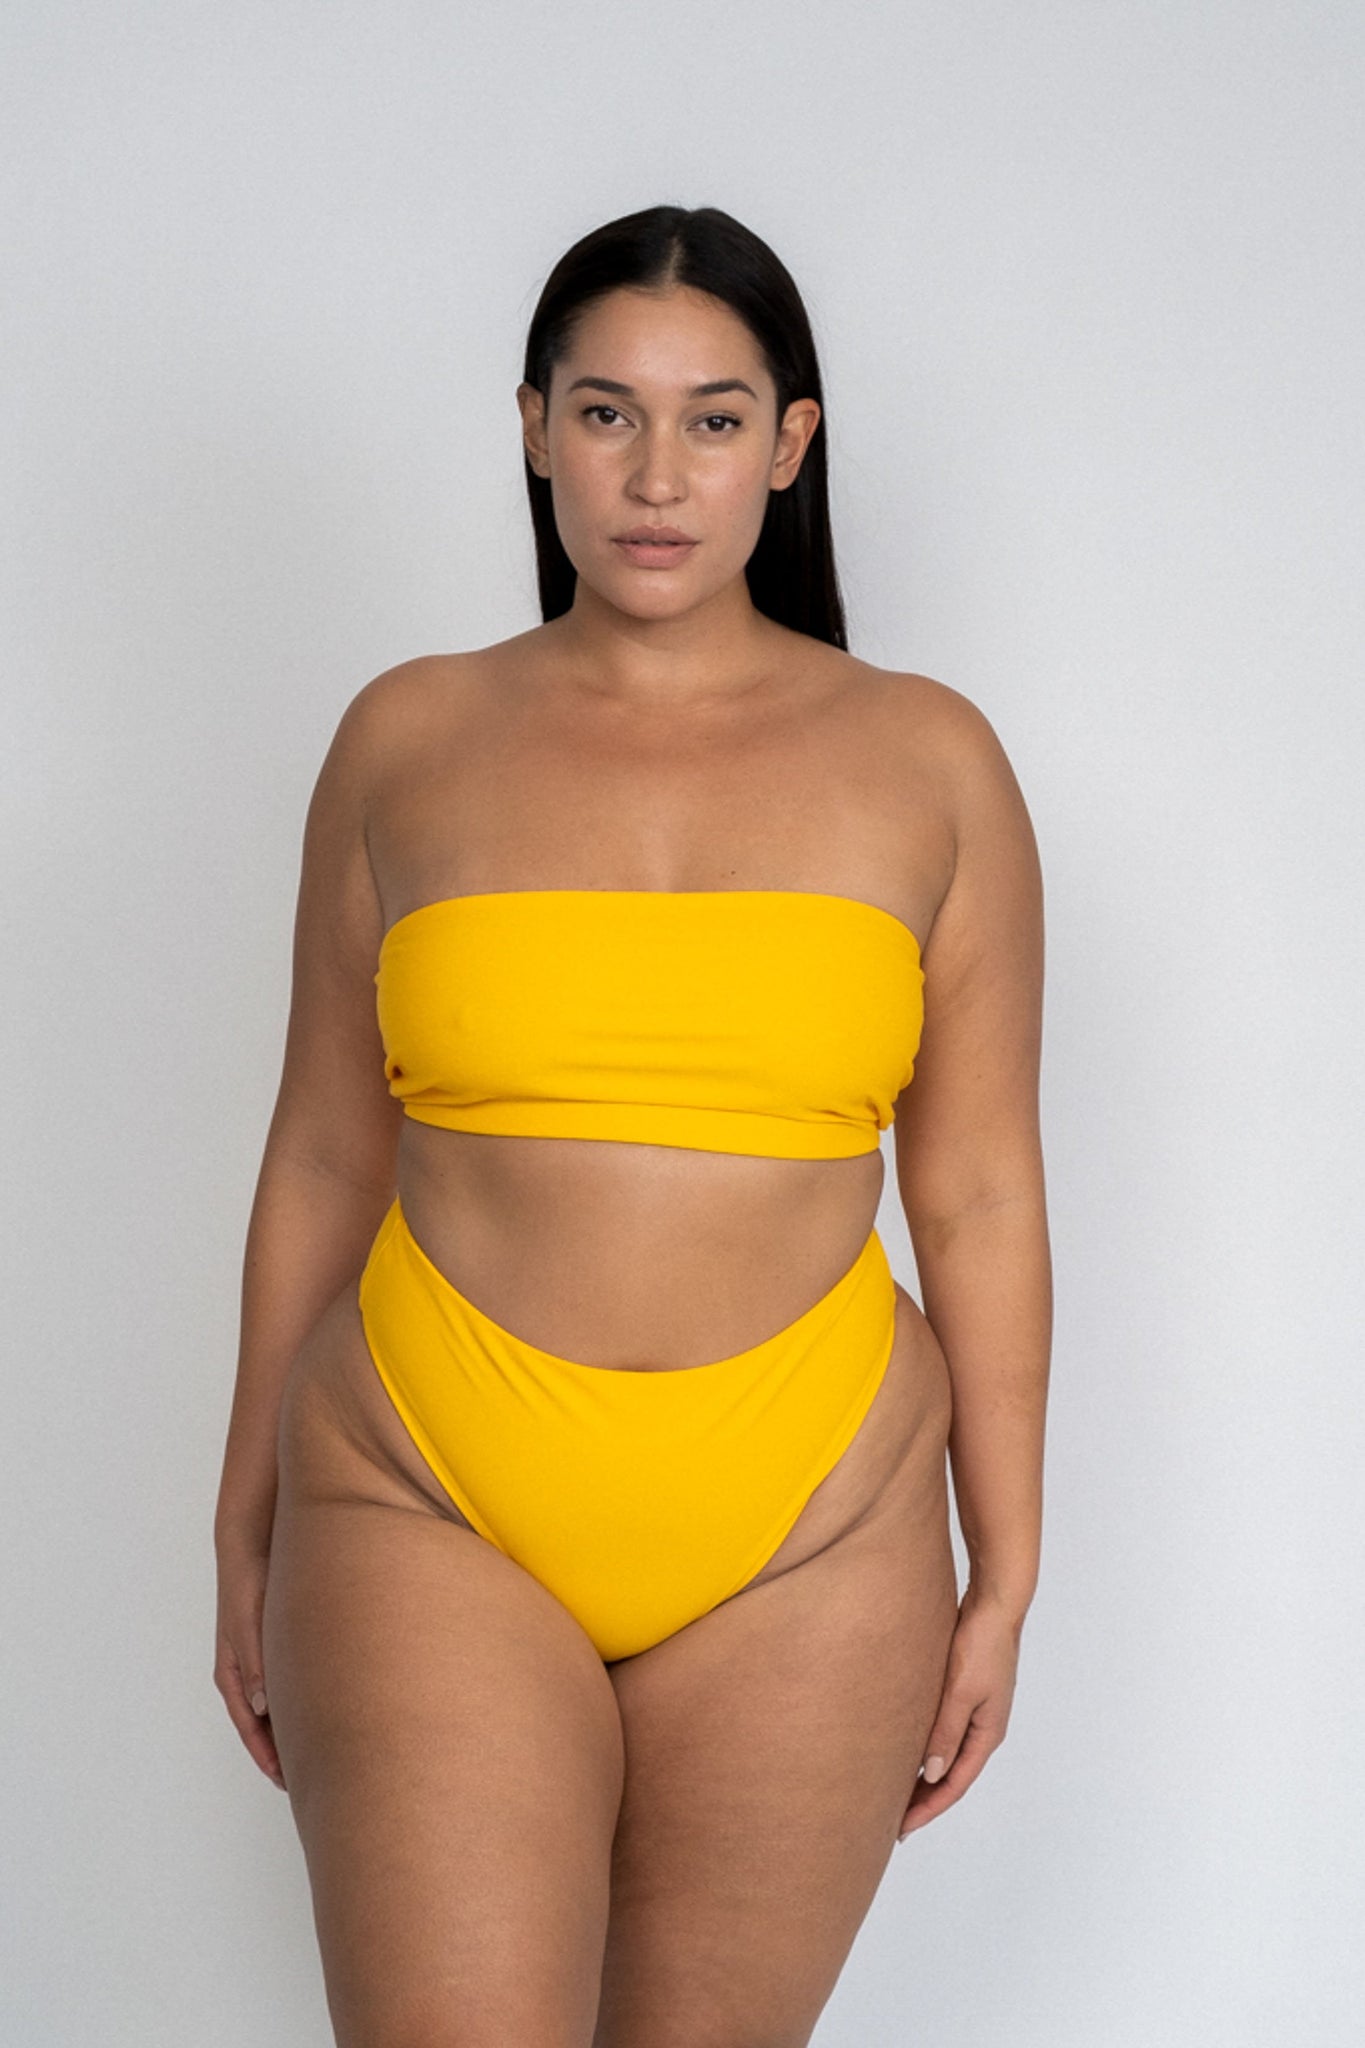 A woman standing with her arms straight beside her wearing yellow high cut bikini bottoms with a matching yellow strapless bandeau bikini top.